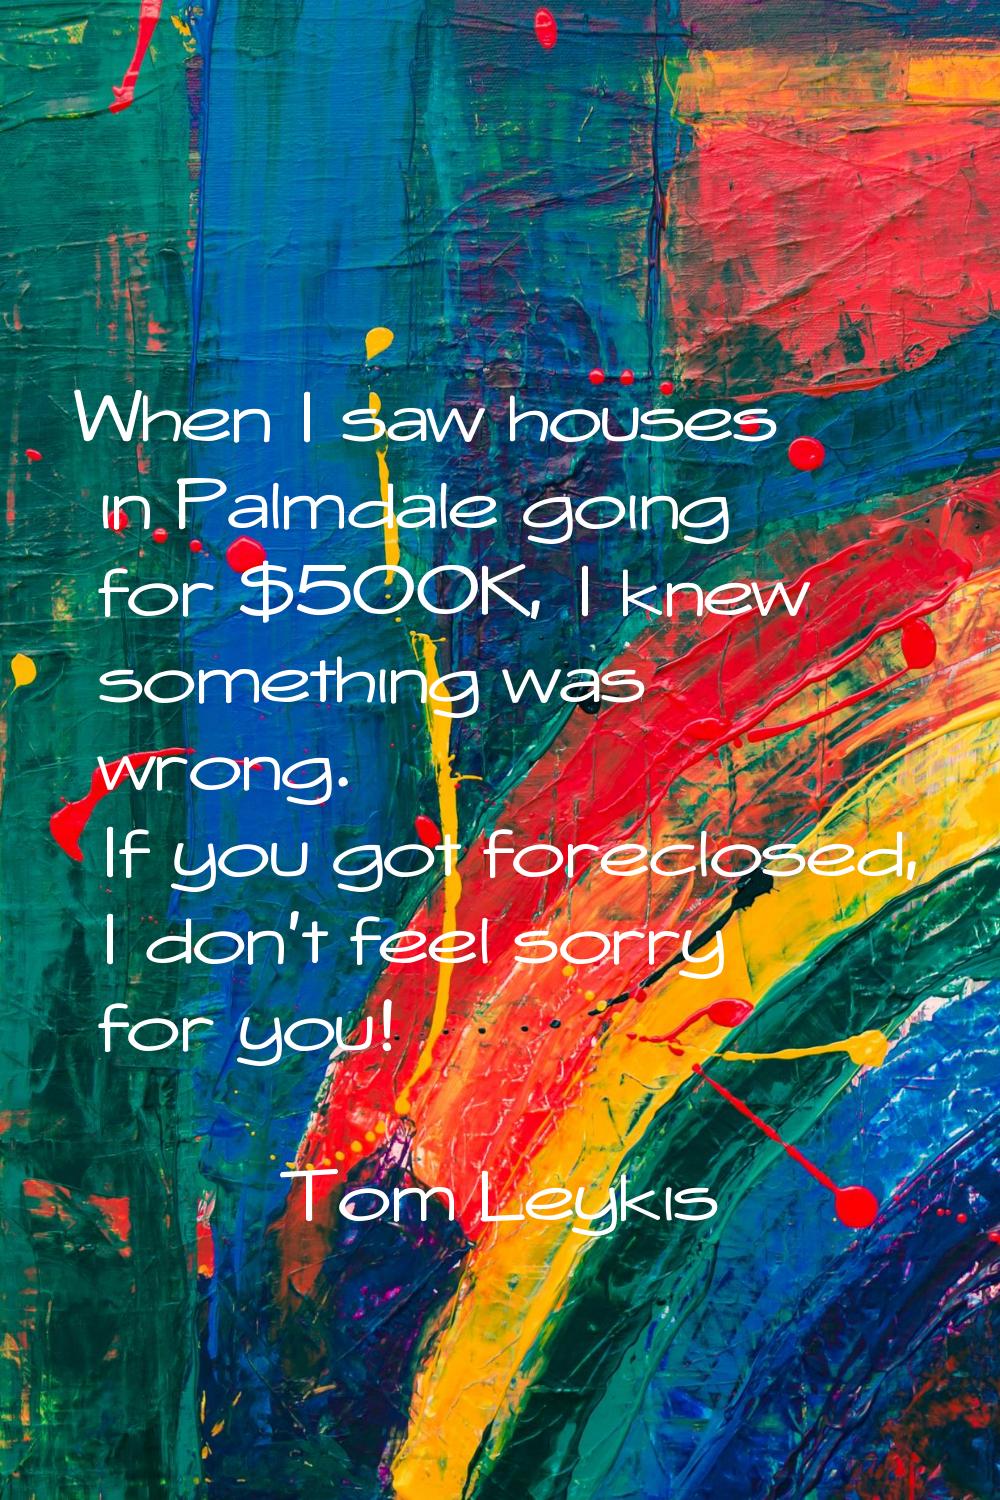 When I saw houses in Palmdale going for $500K, I knew something was wrong. If you got foreclosed, I